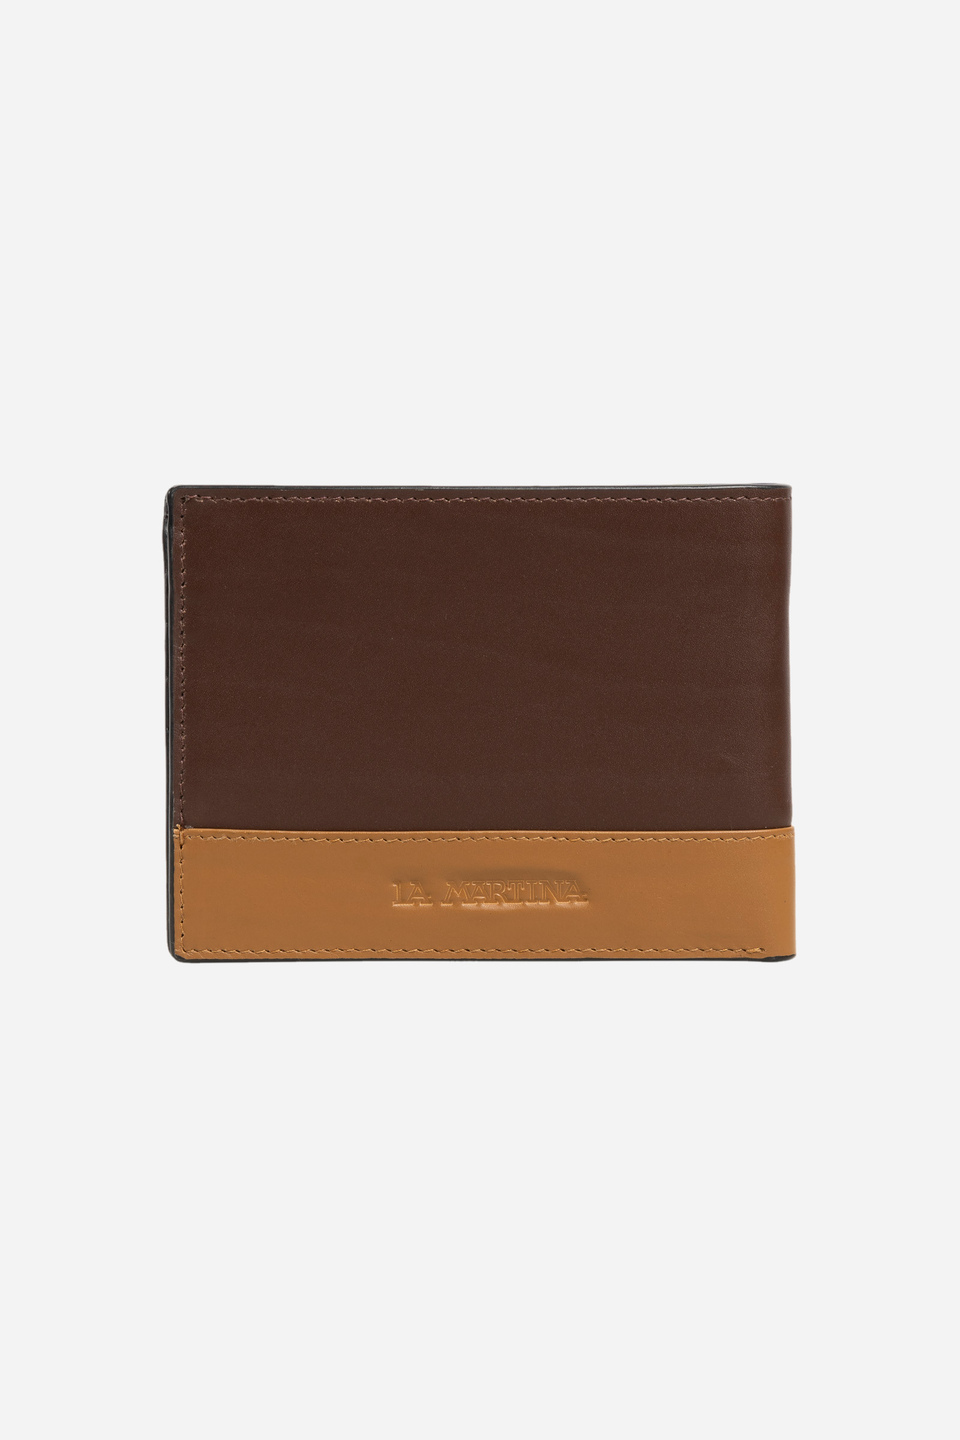 Buy Online FIONA Mens Leather Bifold Wallet | Wallets For Men RFID Blocking  | Genuine Leather | Extra Ca - Zifiti.com 1044465